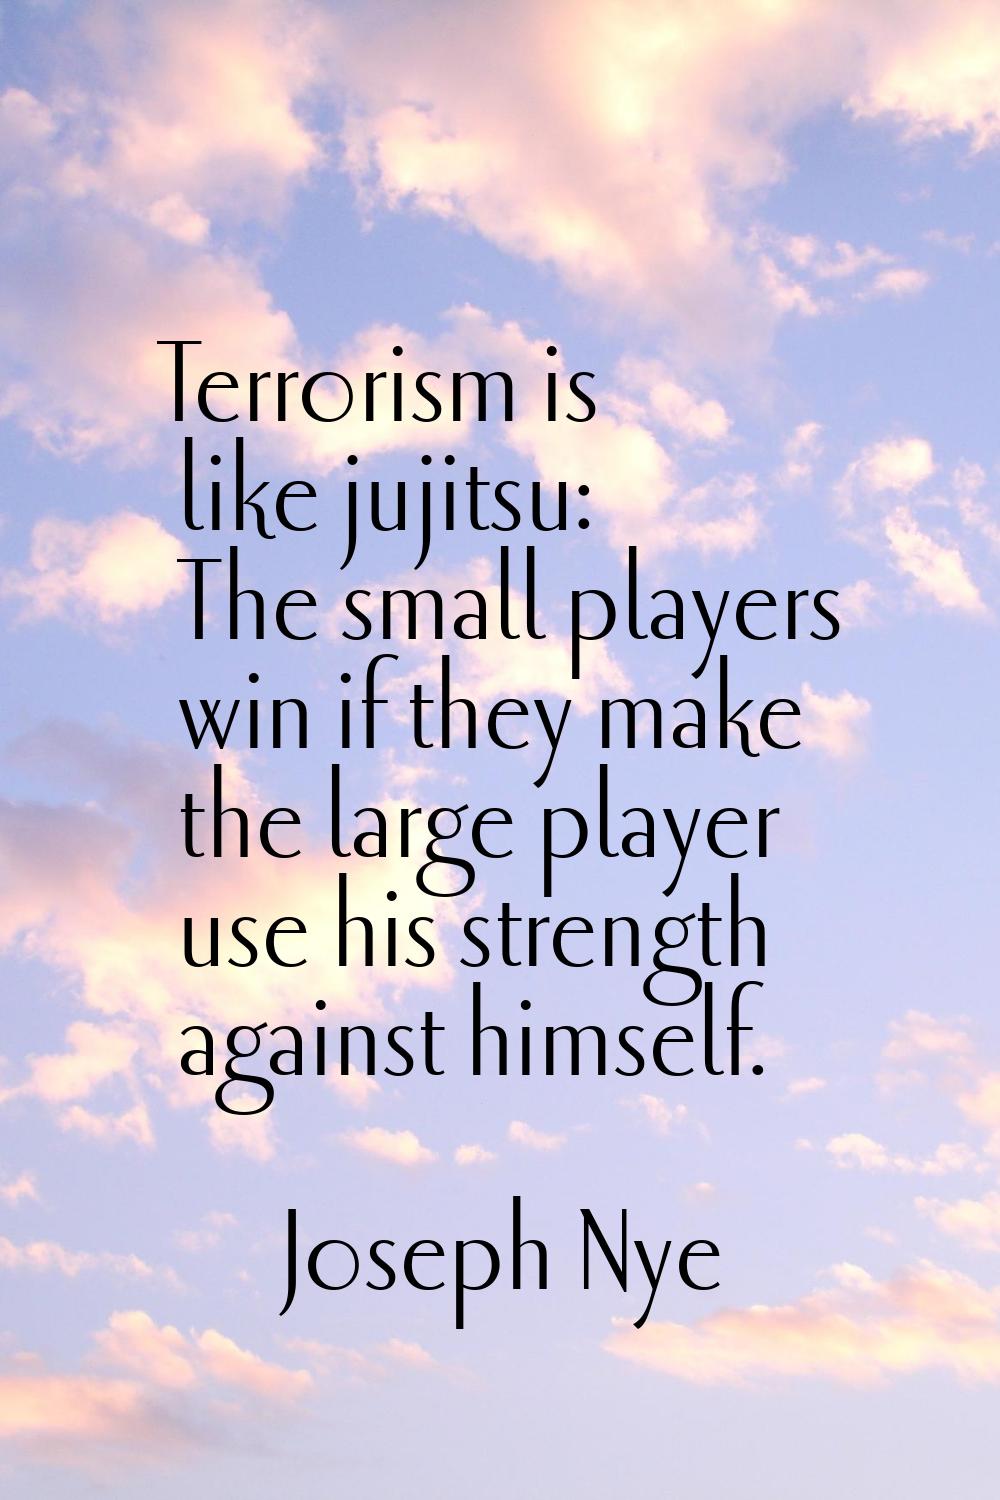 Terrorism is like jujitsu: The small players win if they make the large player use his strength aga